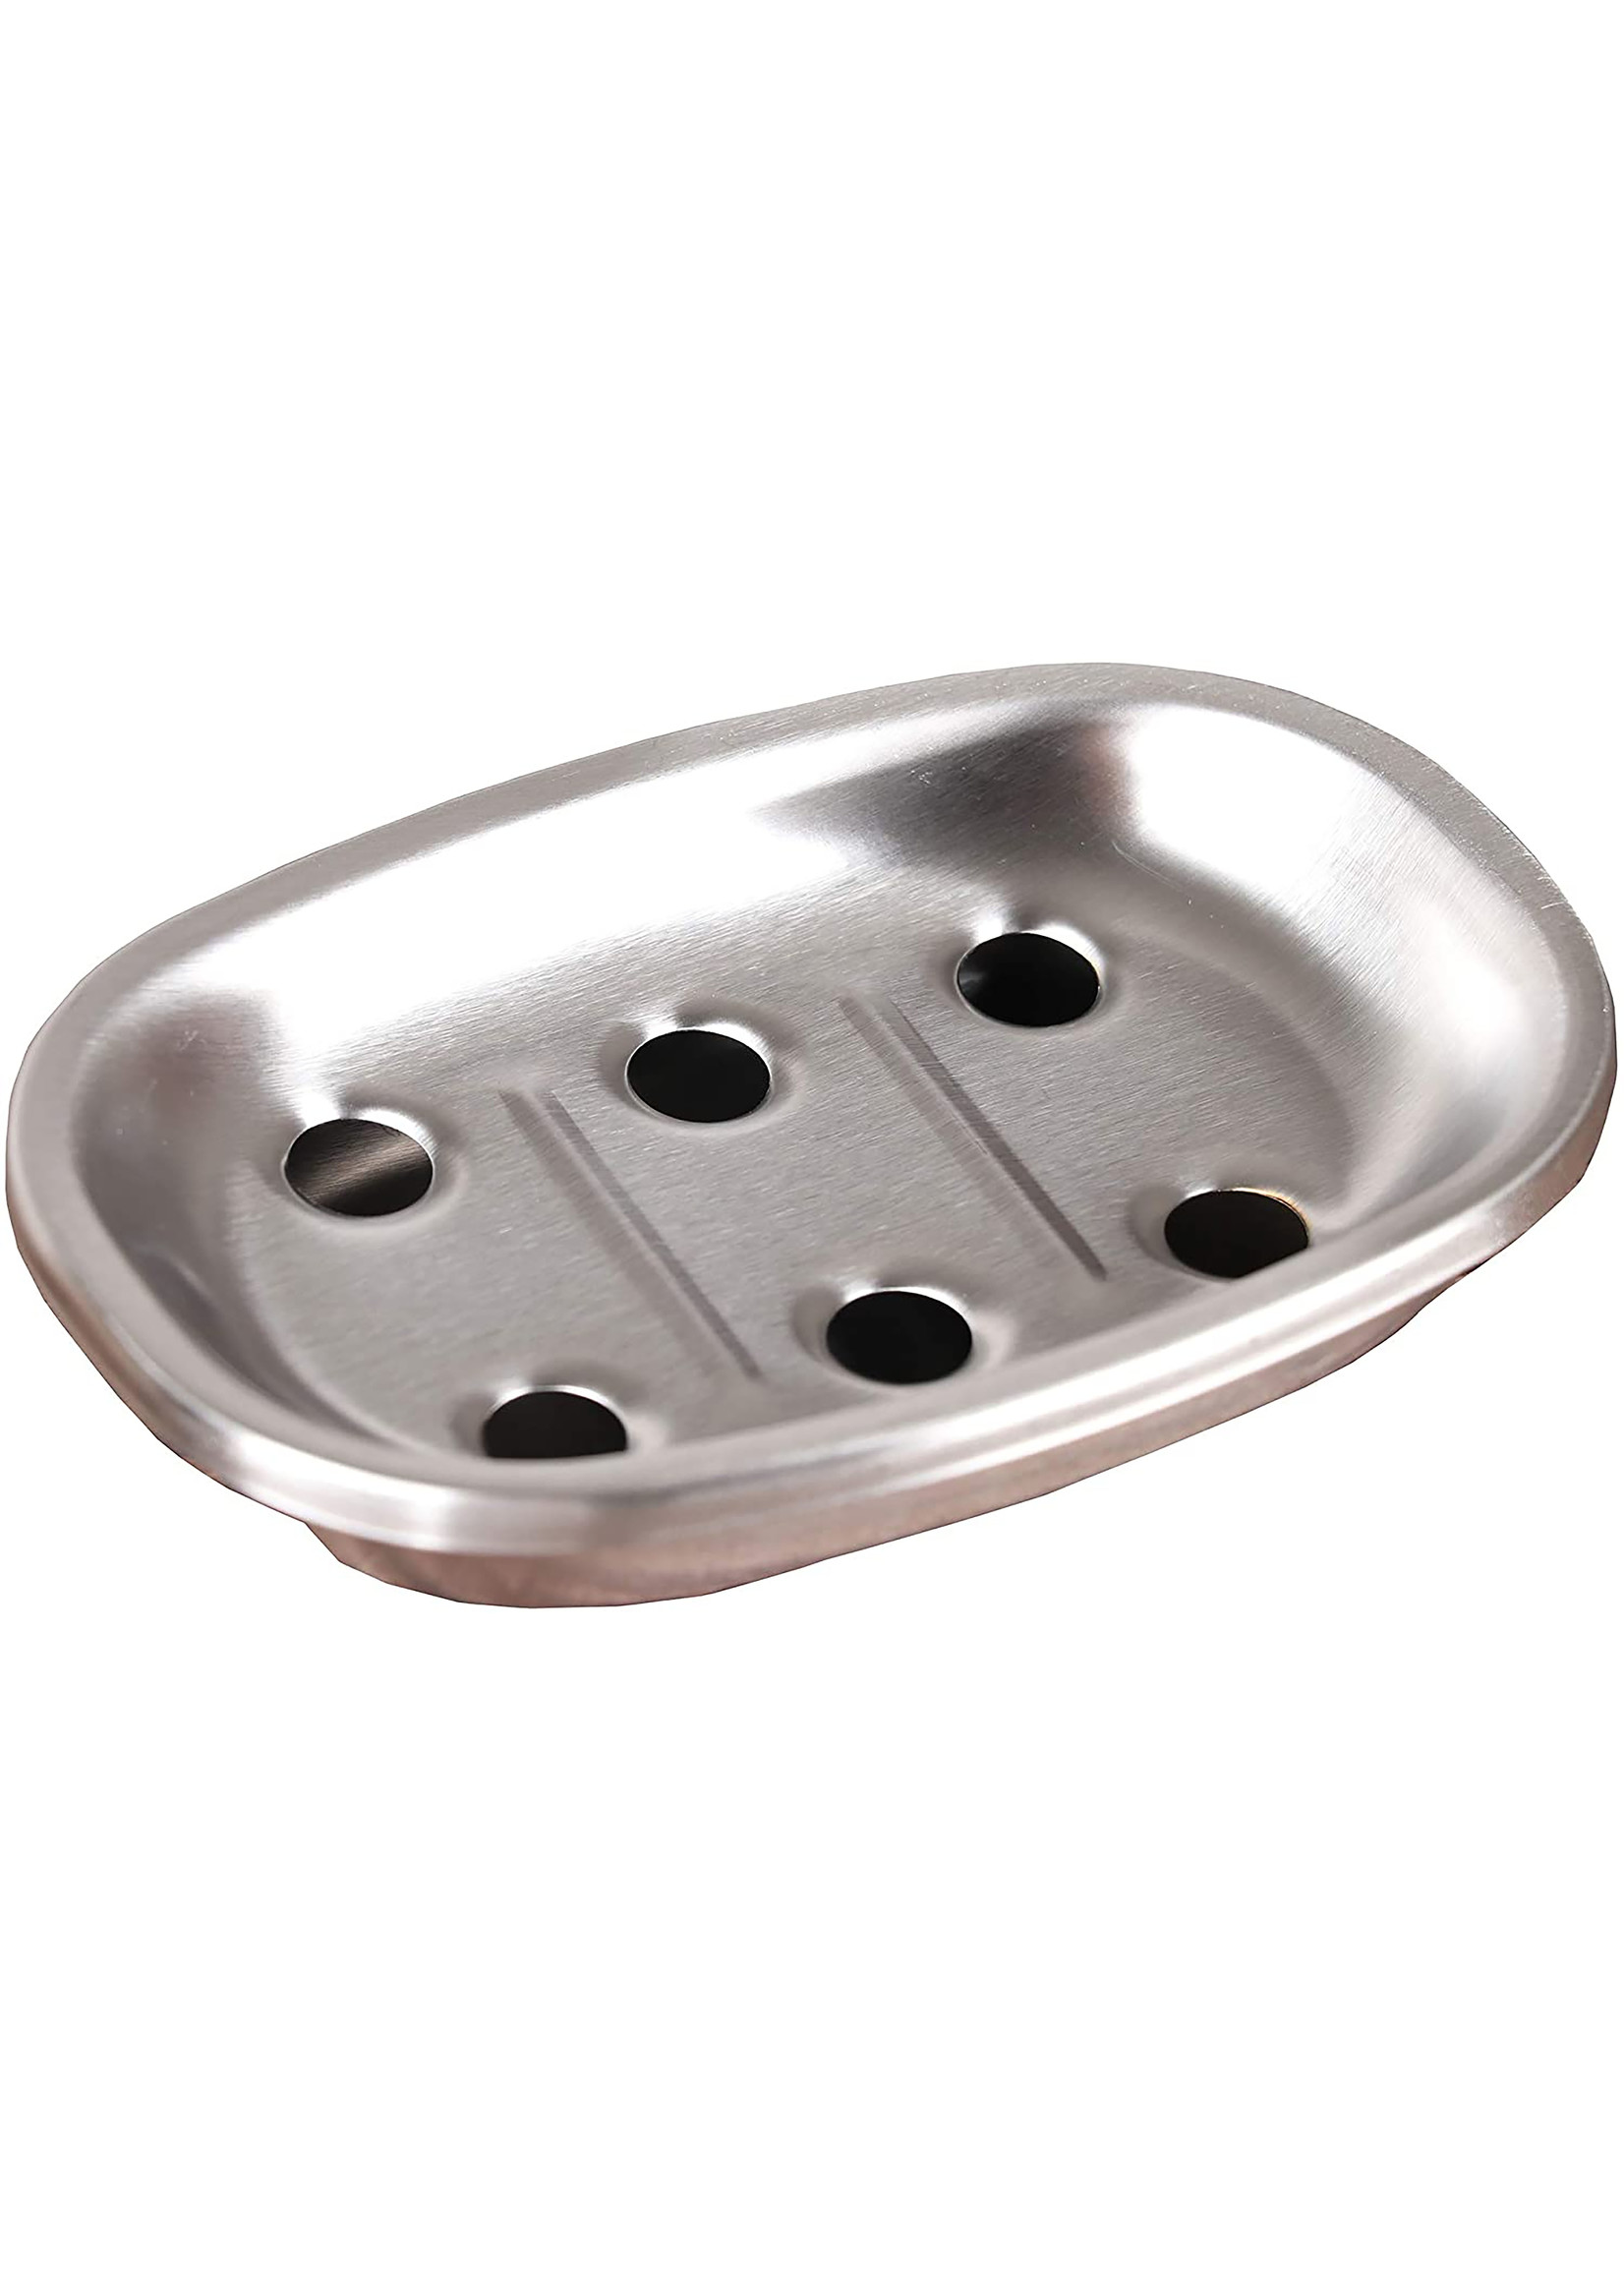 ITY INTERNATIONAL Stainless Steel Soap Dish